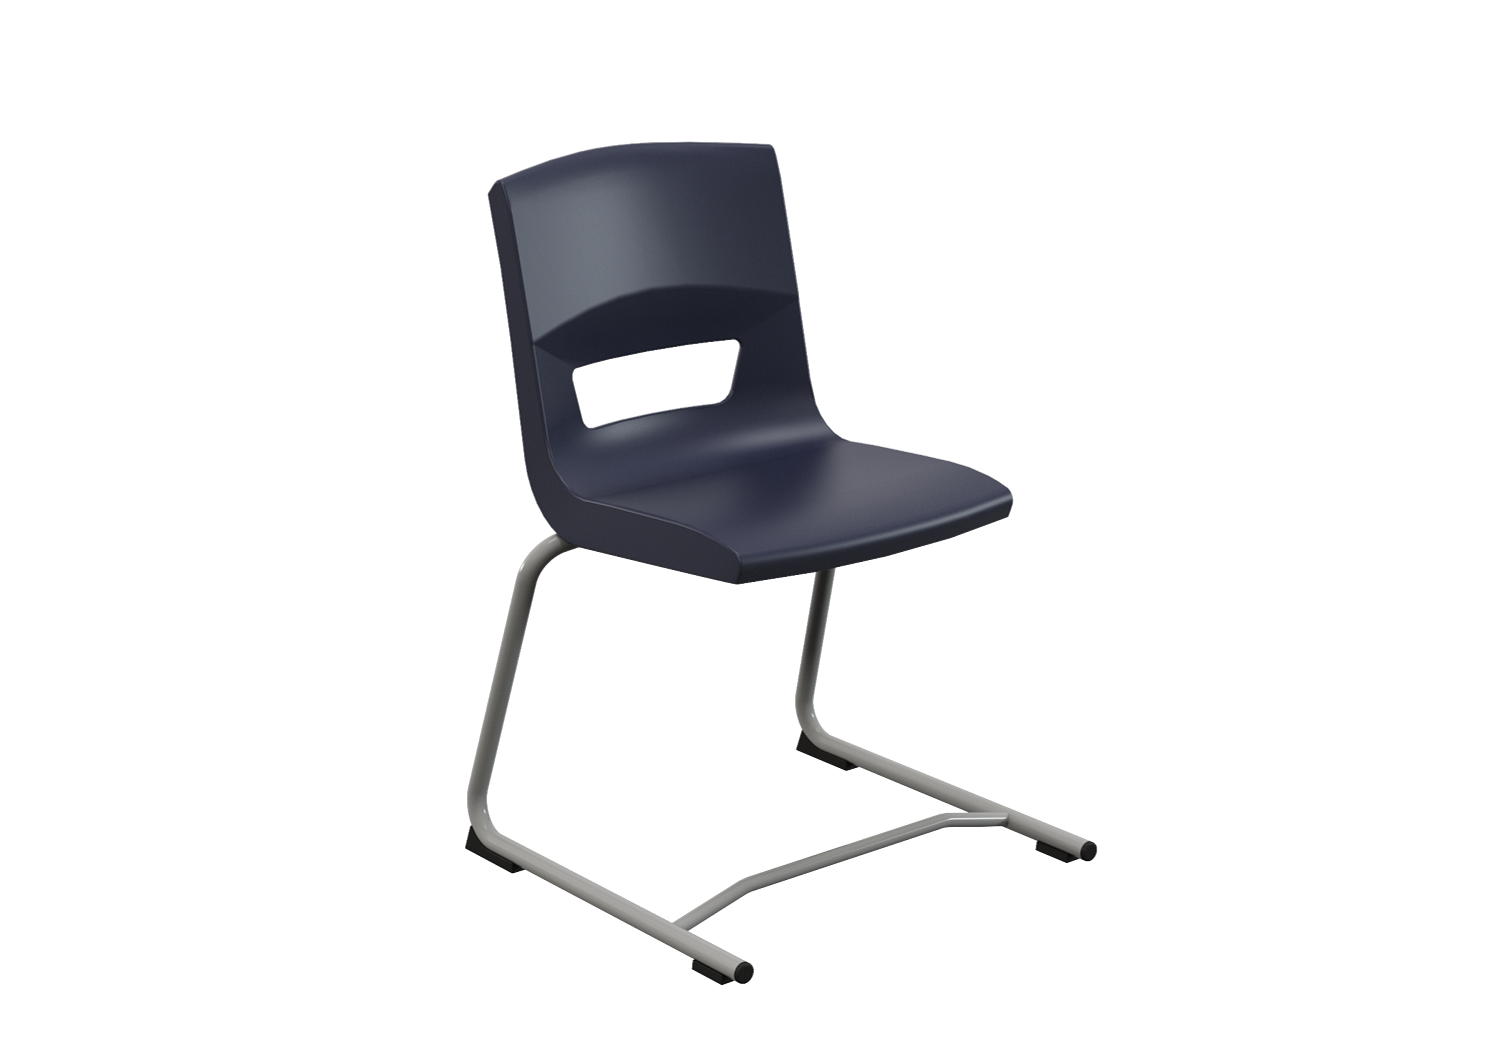 Postura reverse cantilevedr chair for classrom and kitchen grey